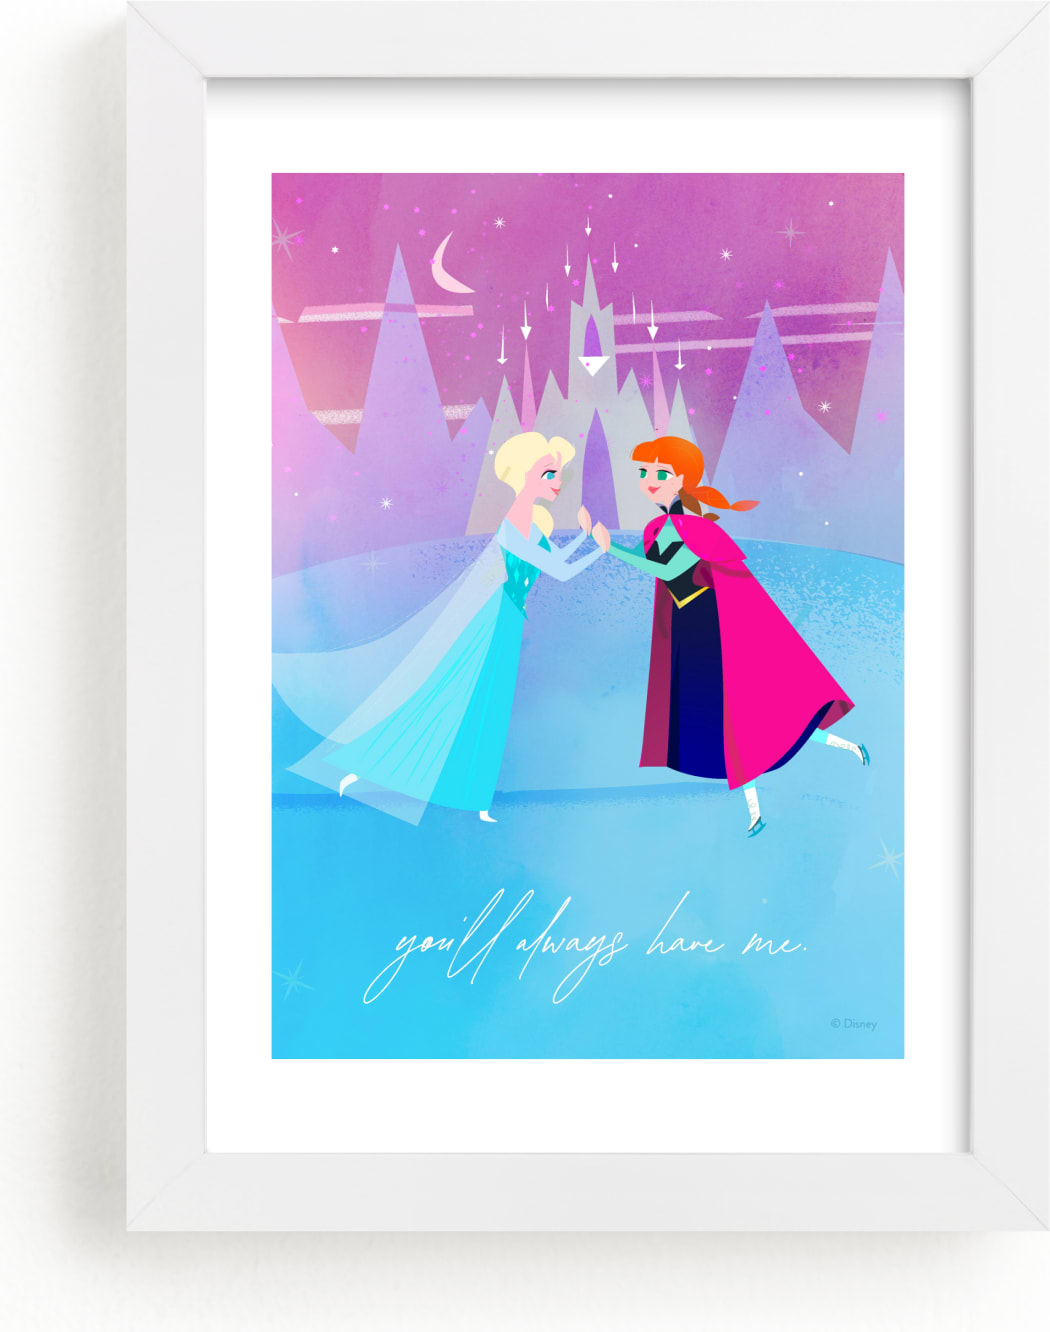 This is a blue, pink disney art by Lori Wemple called Elsa and Anna from Disney's Frozen.